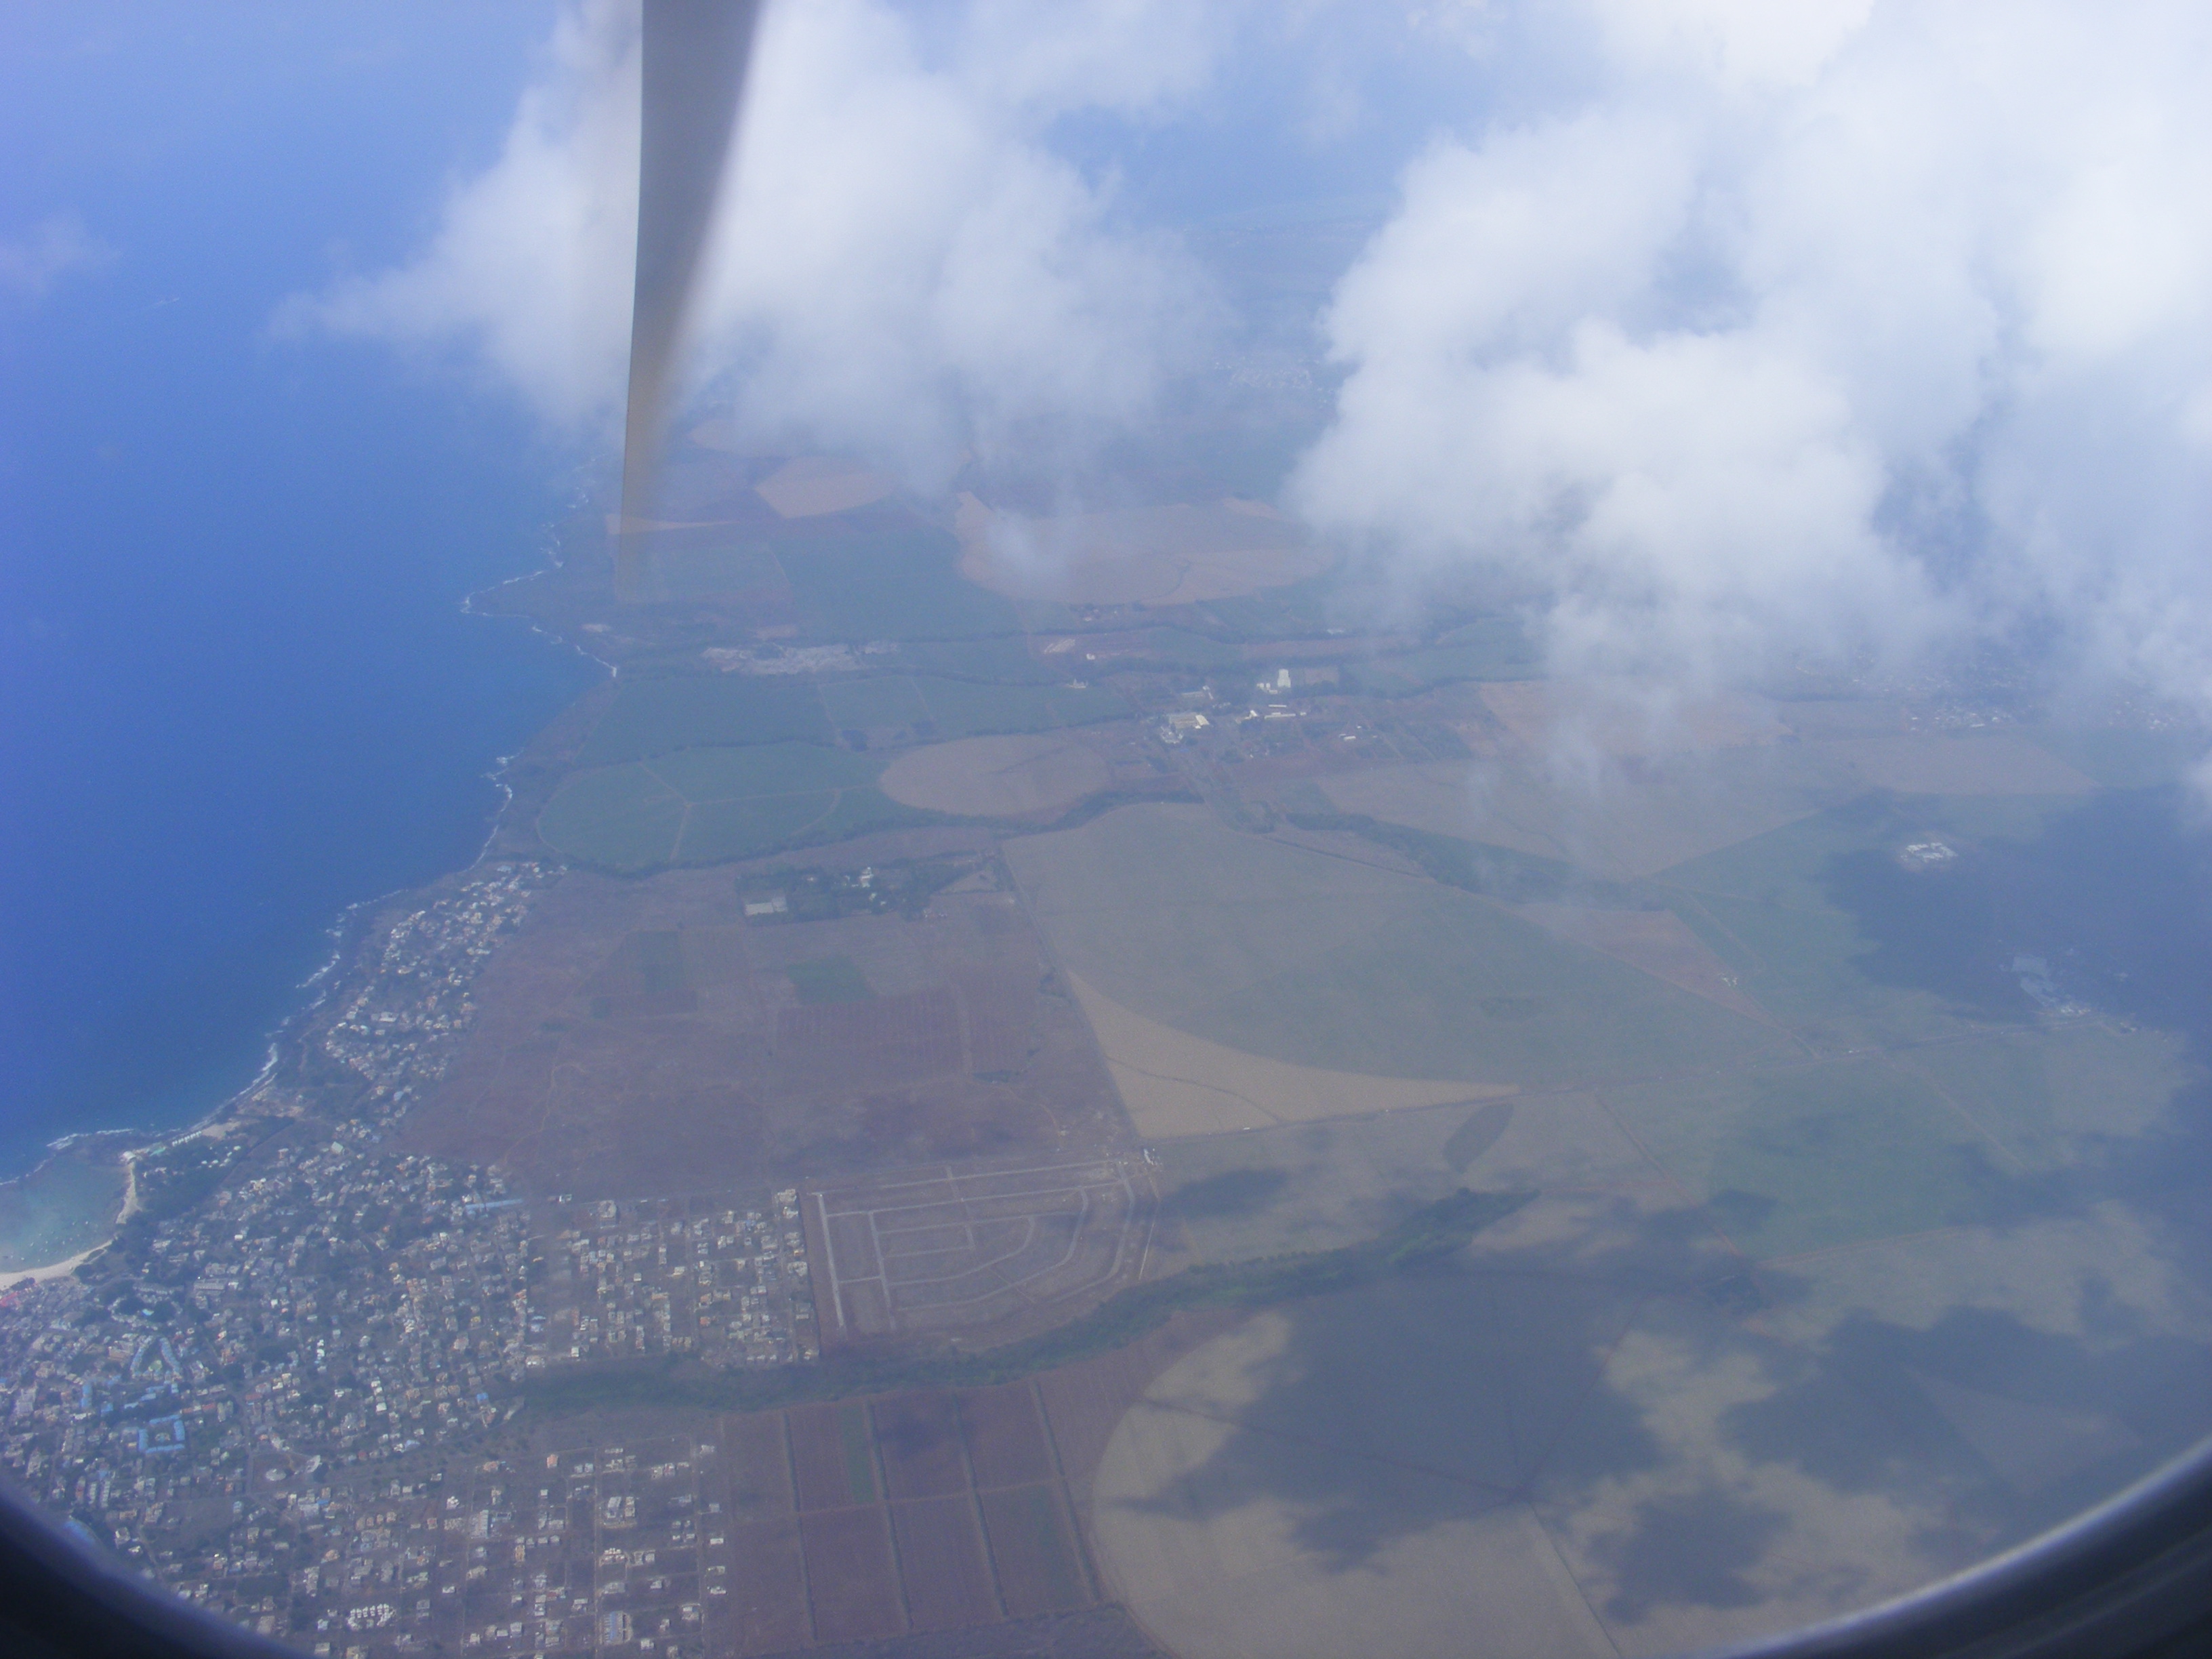 My first view of Mauritius as the aeroplane arrives over the island.